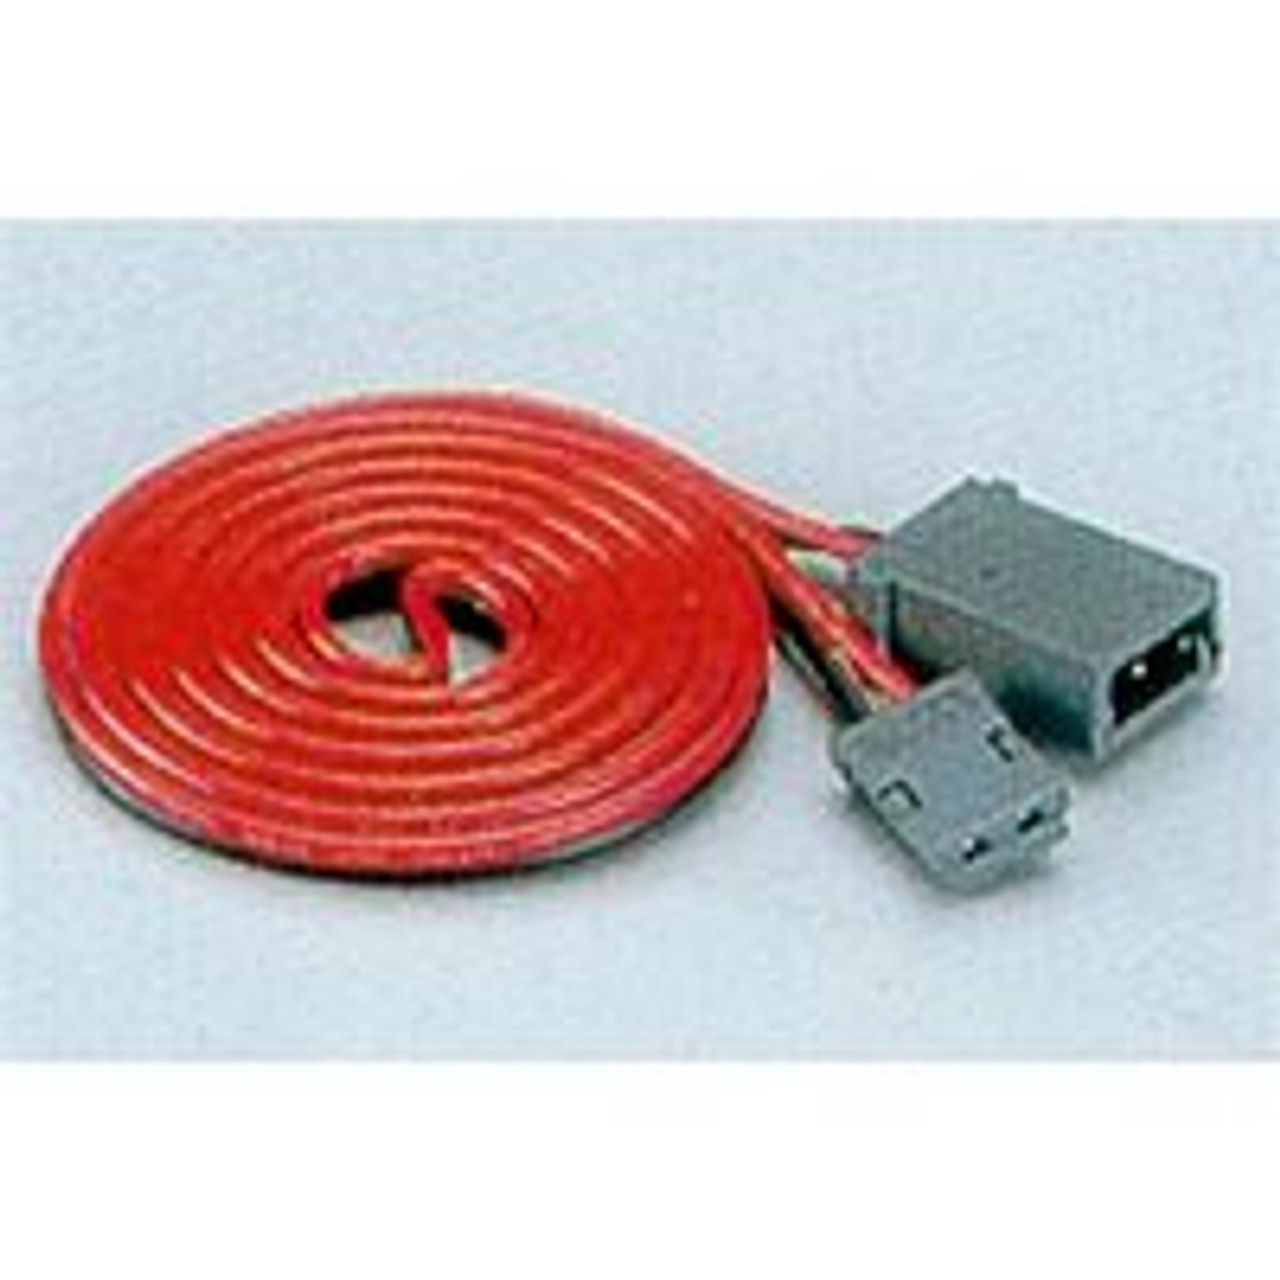 Kato 24-845 N Automatic Three-Color Signal Extension Cord